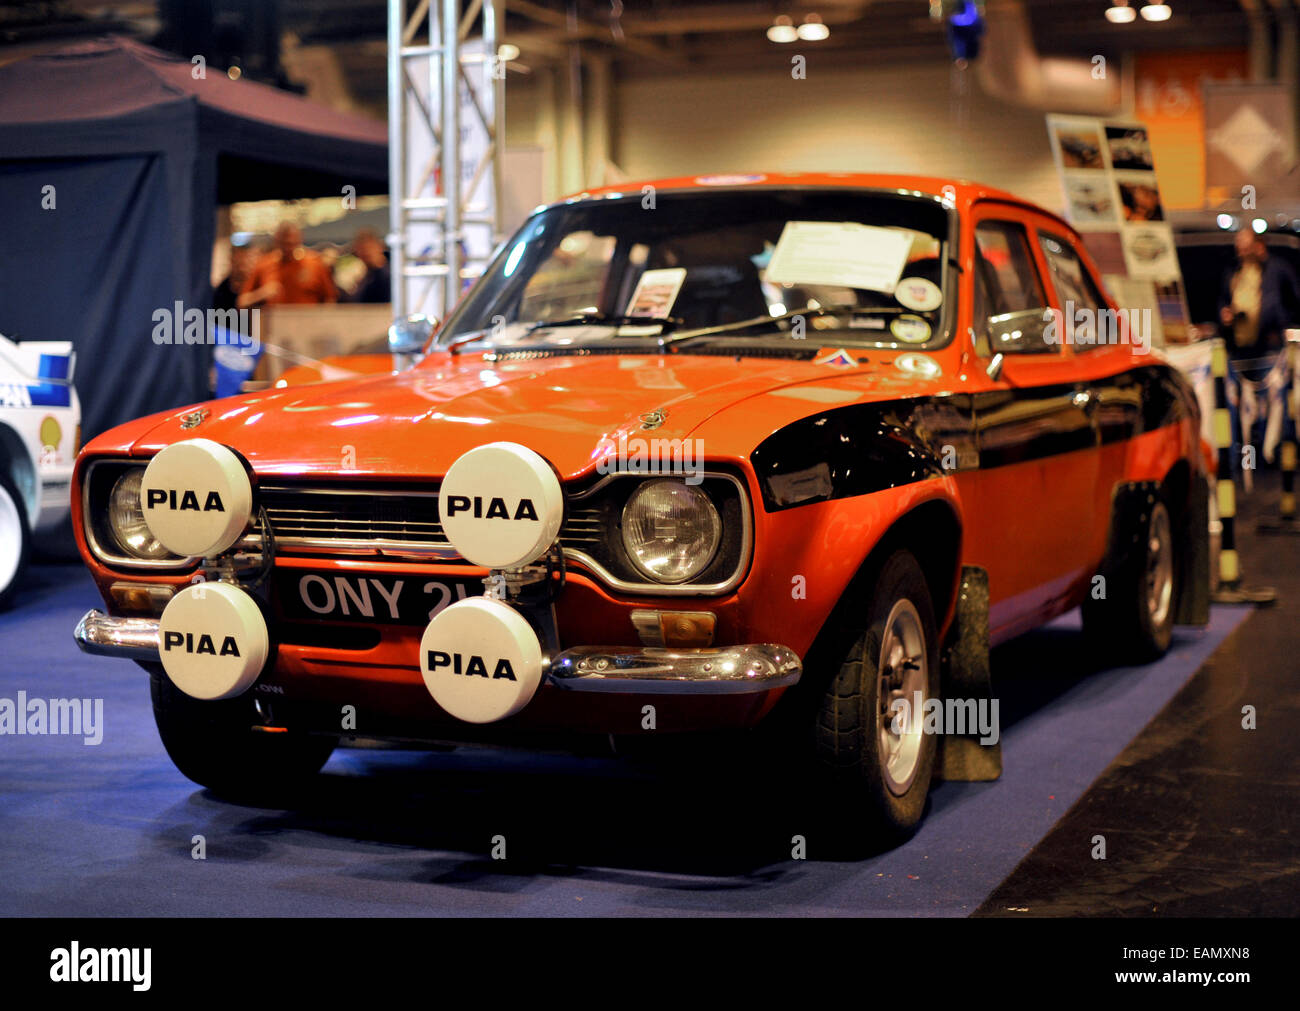 Mk1 Ford Escort rally car classic car at the 2014 NEC classic car show Stock Photo